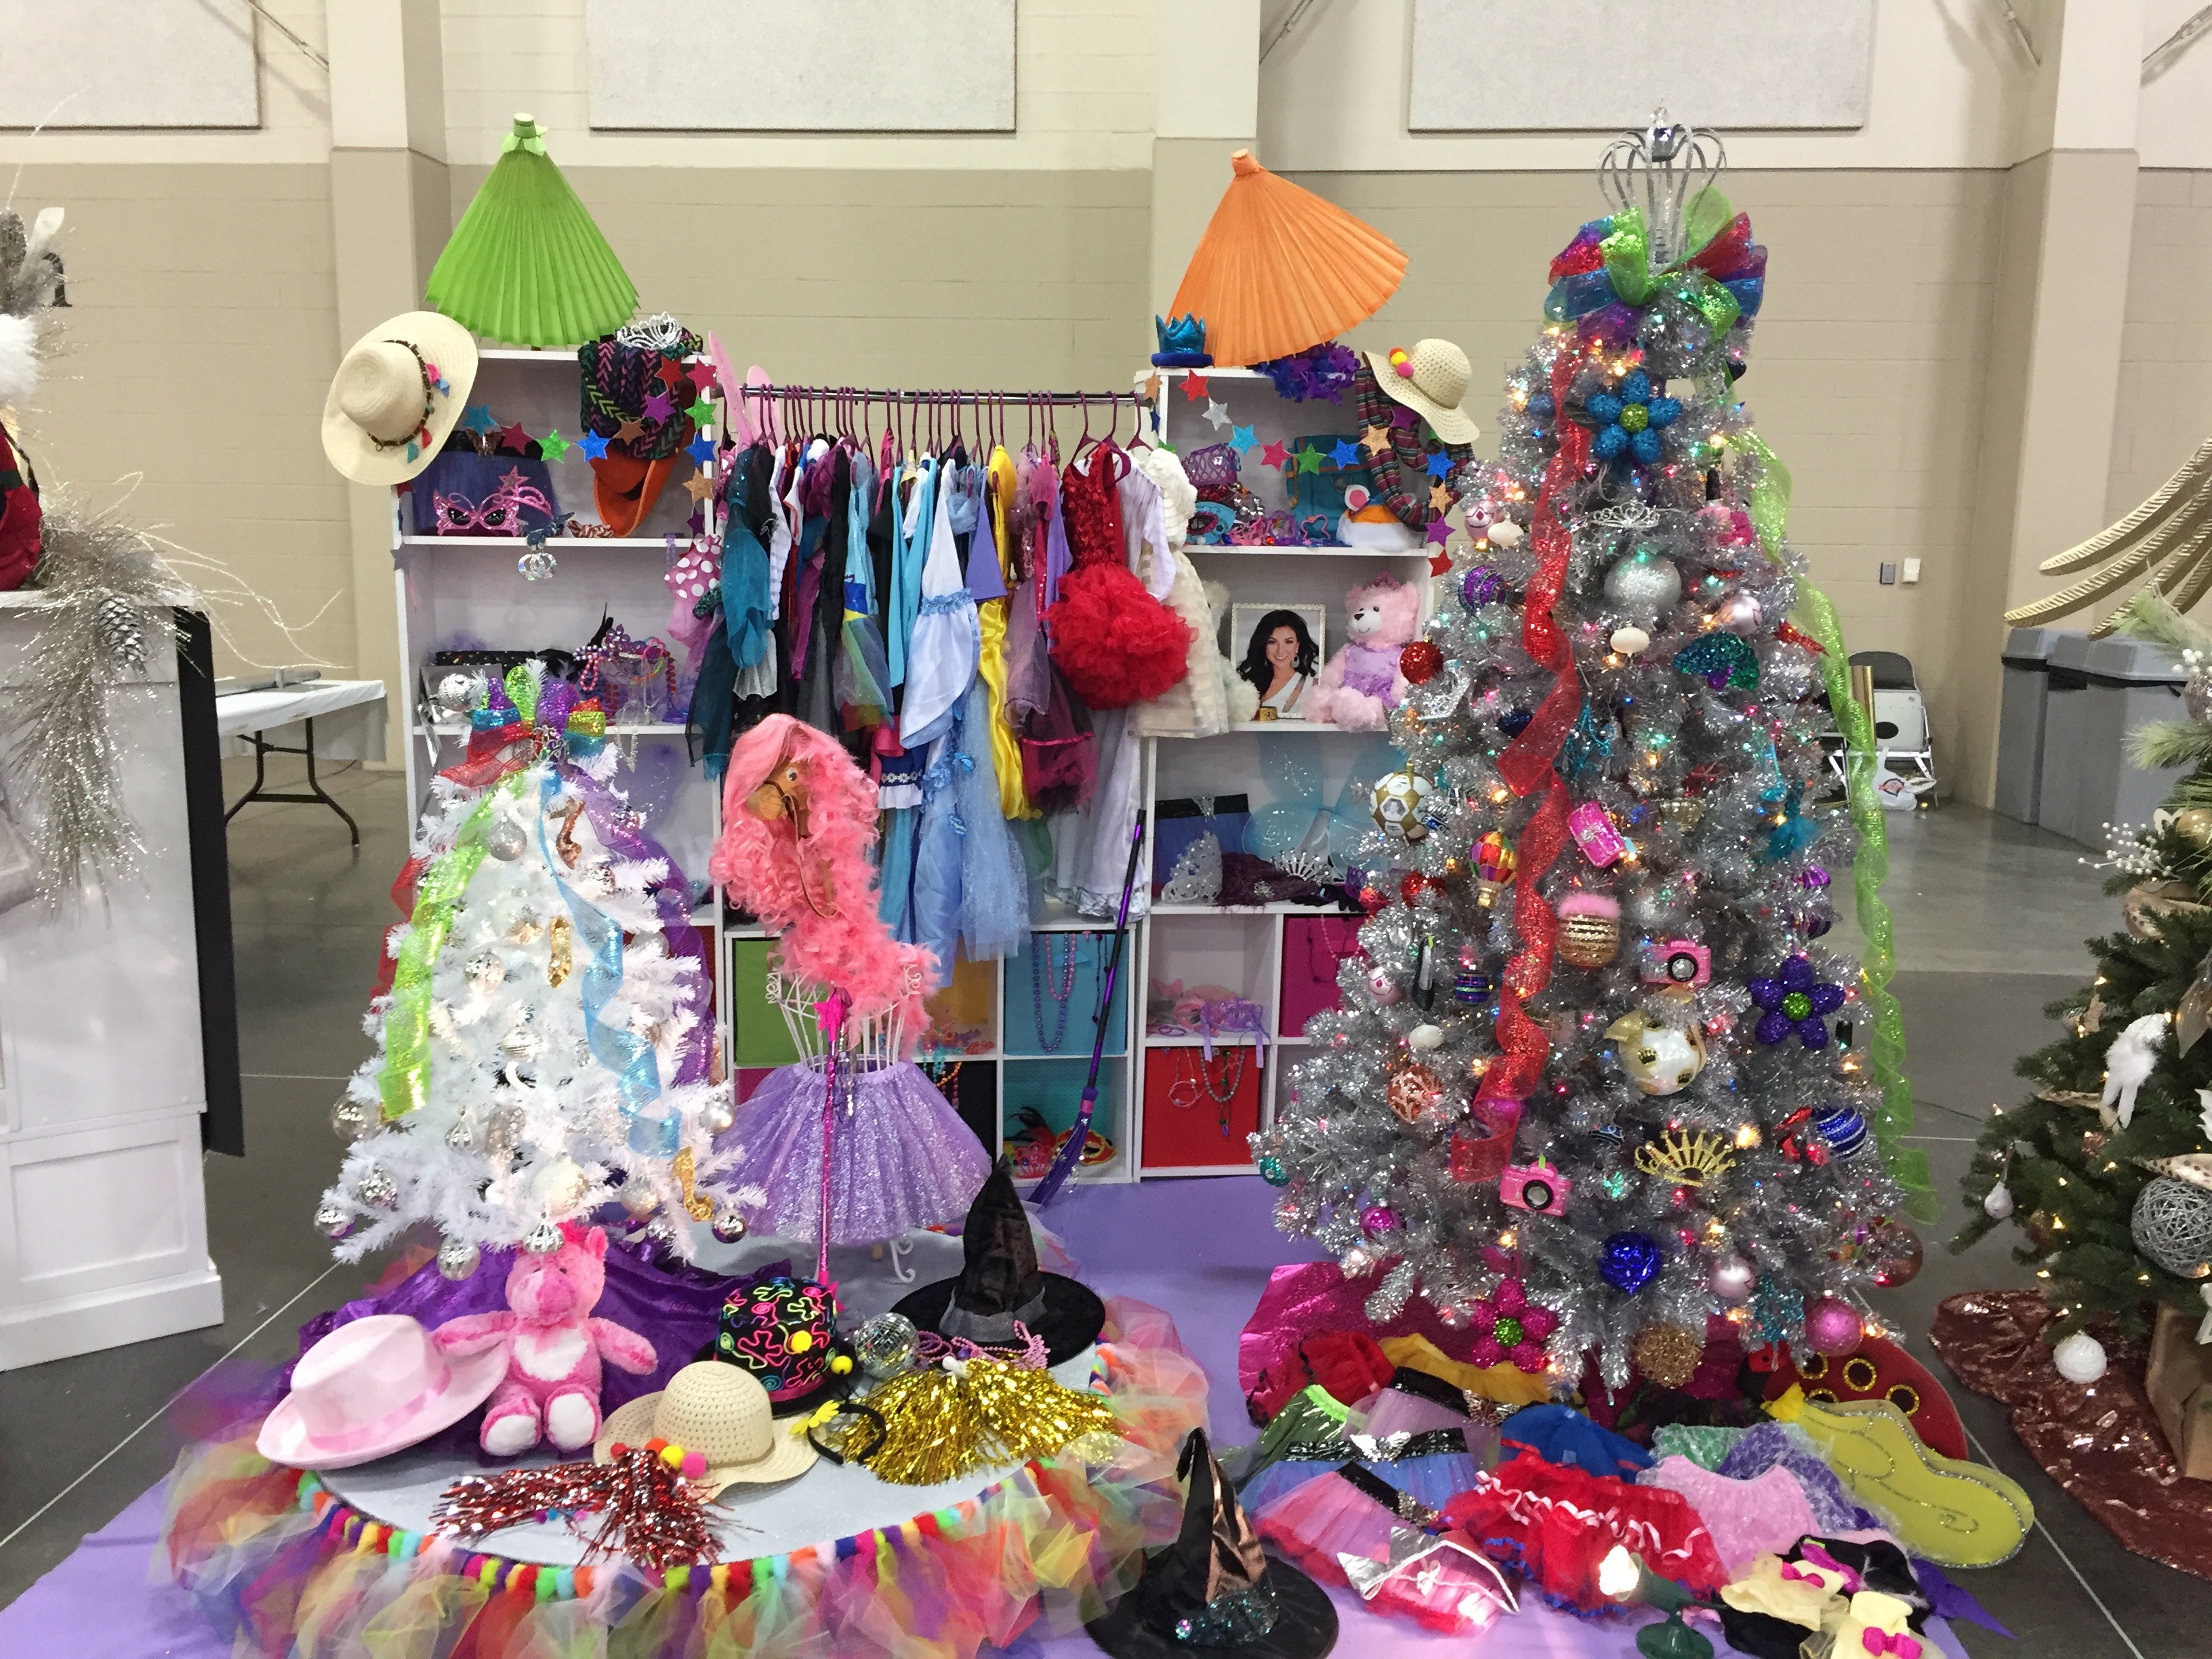 2017 Festival of Trees display